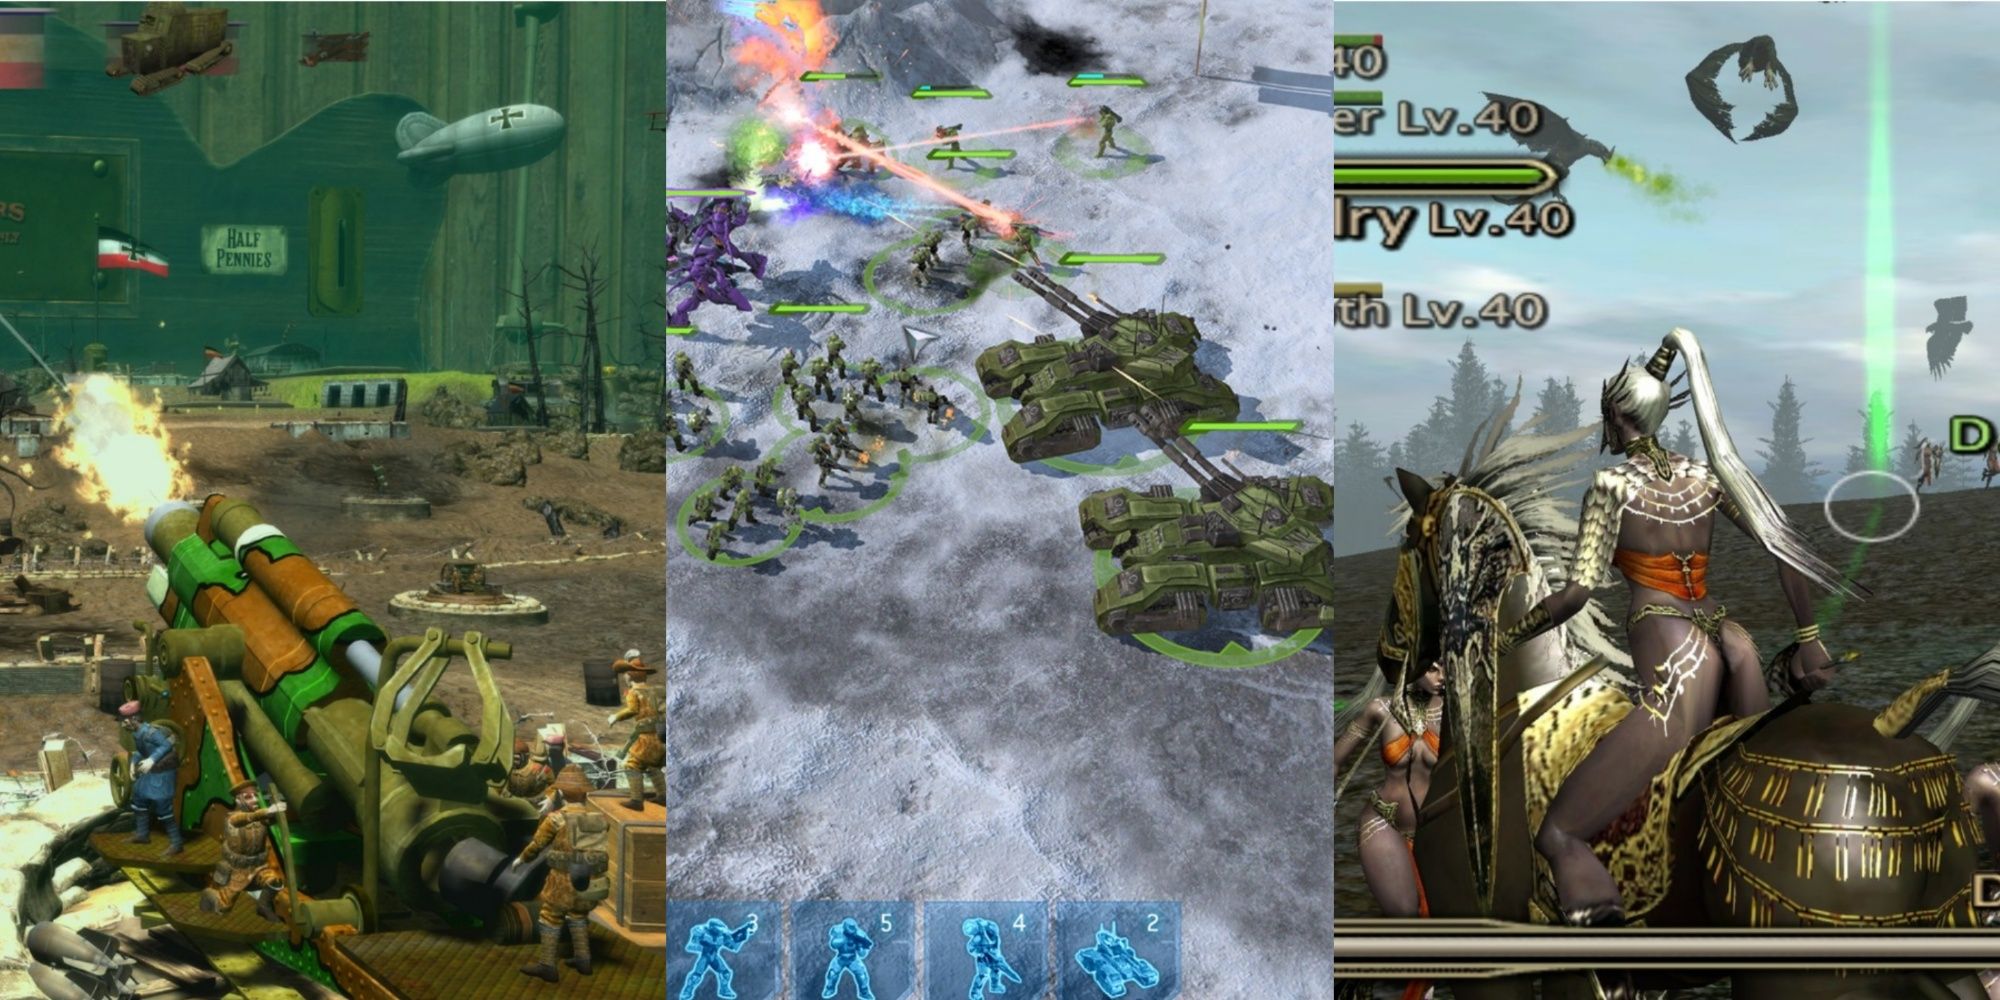 A trisplit of toy soldiers firing a toy gun, the battlefield from Halo Wars and a hero from Kingdom Under Fire: Heroes